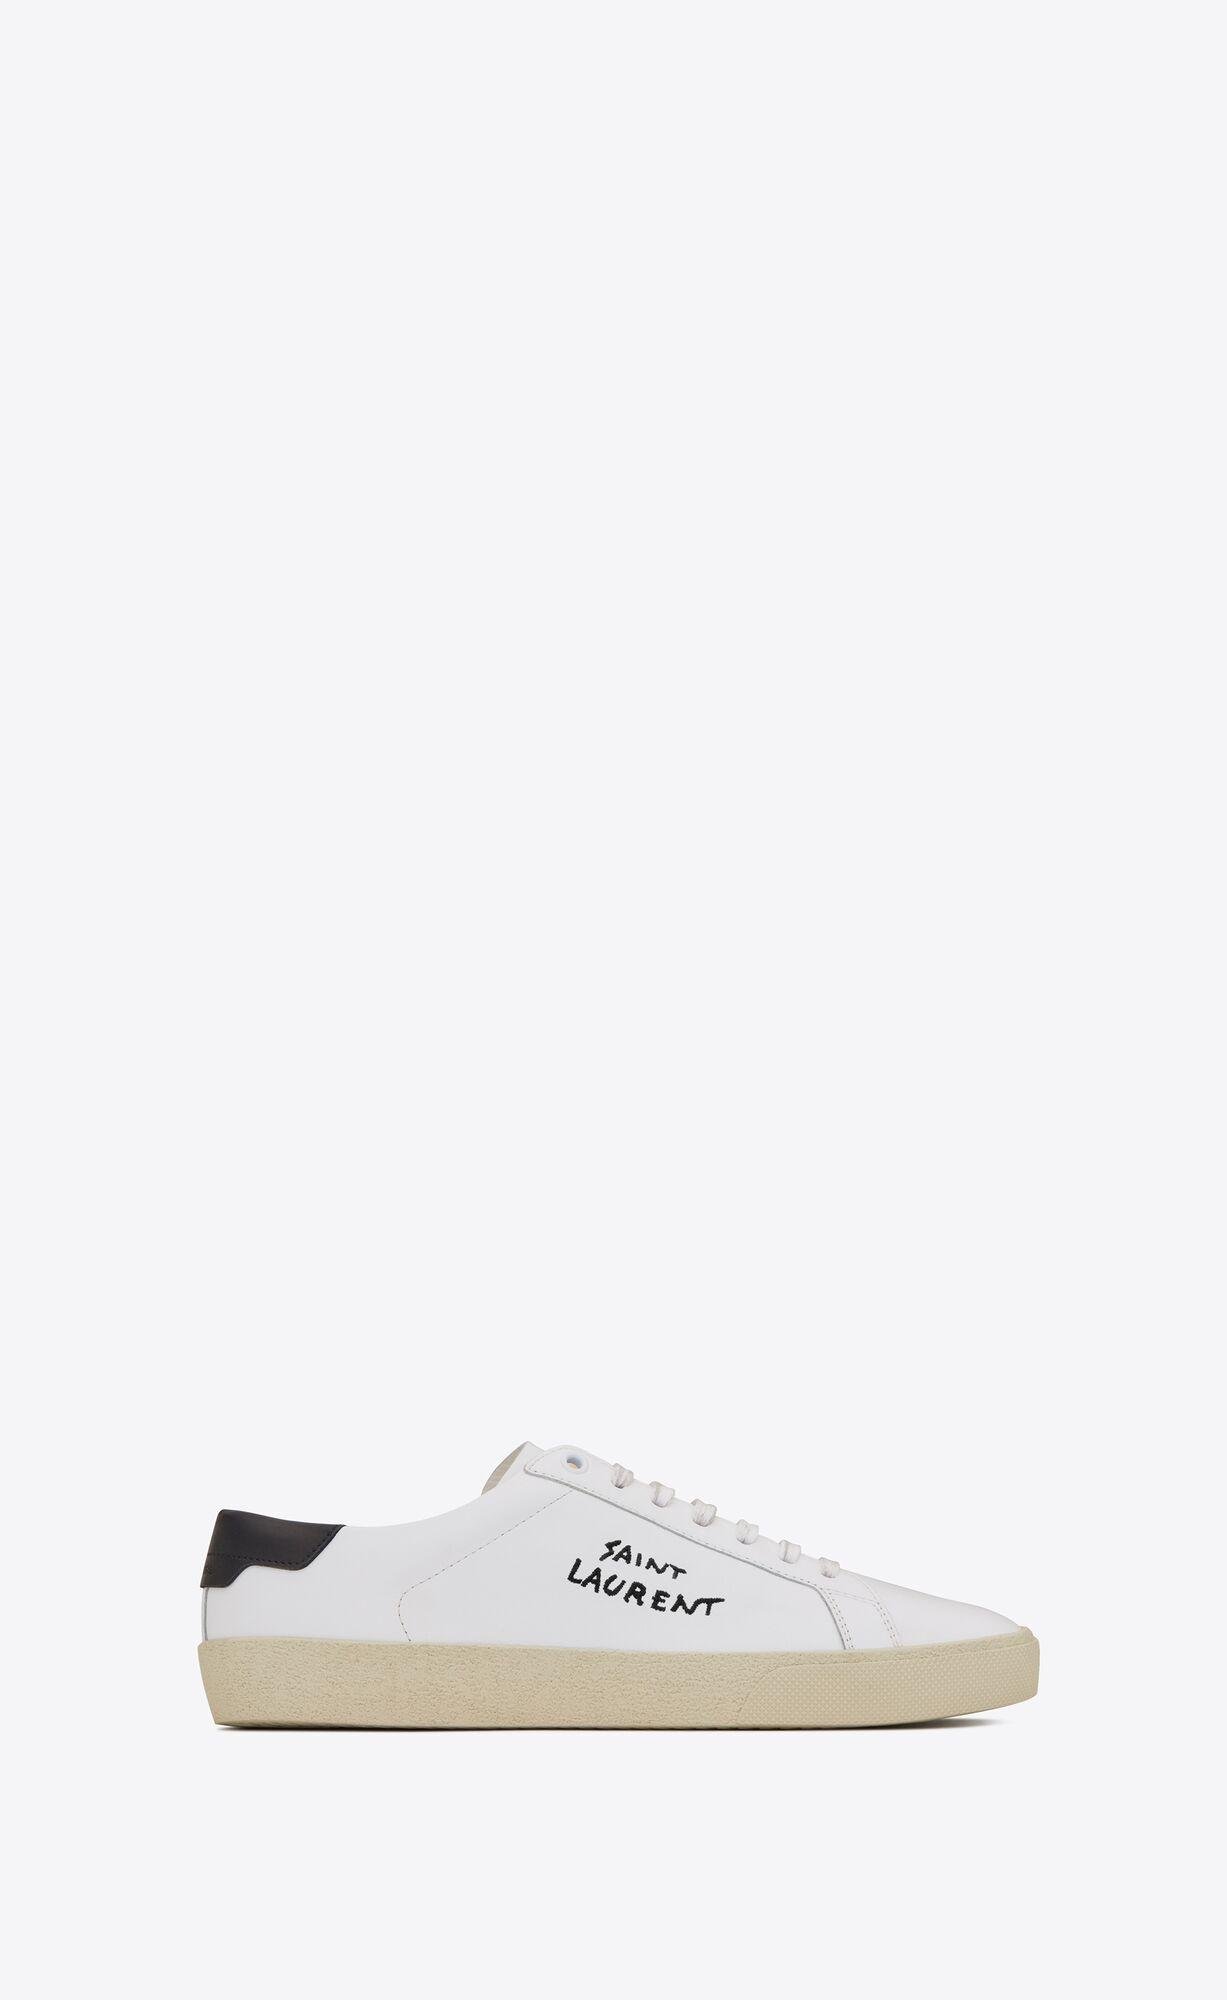 court classic sl/06 embroidered sneakers in leather by SAINT LAURENT